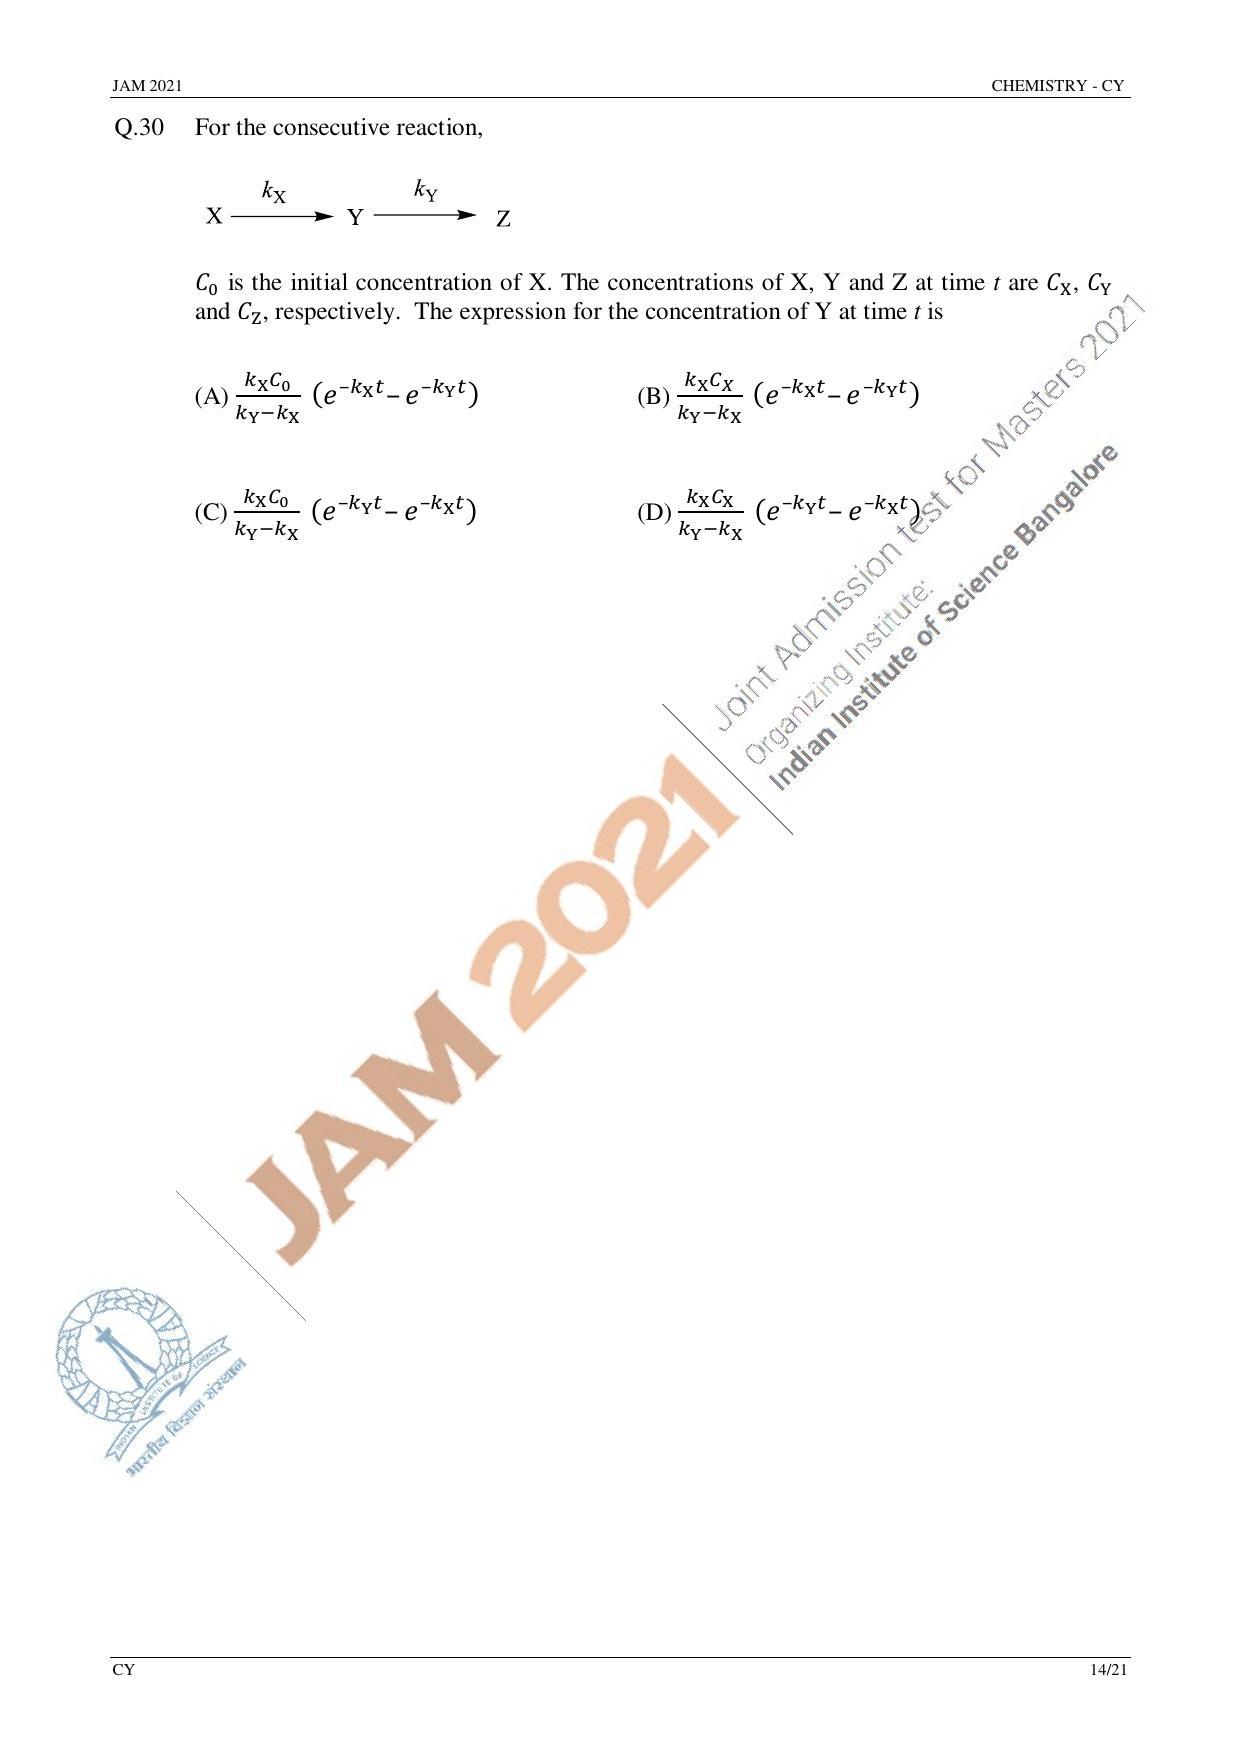 JAM 2021: CY Question Paper - Page 14